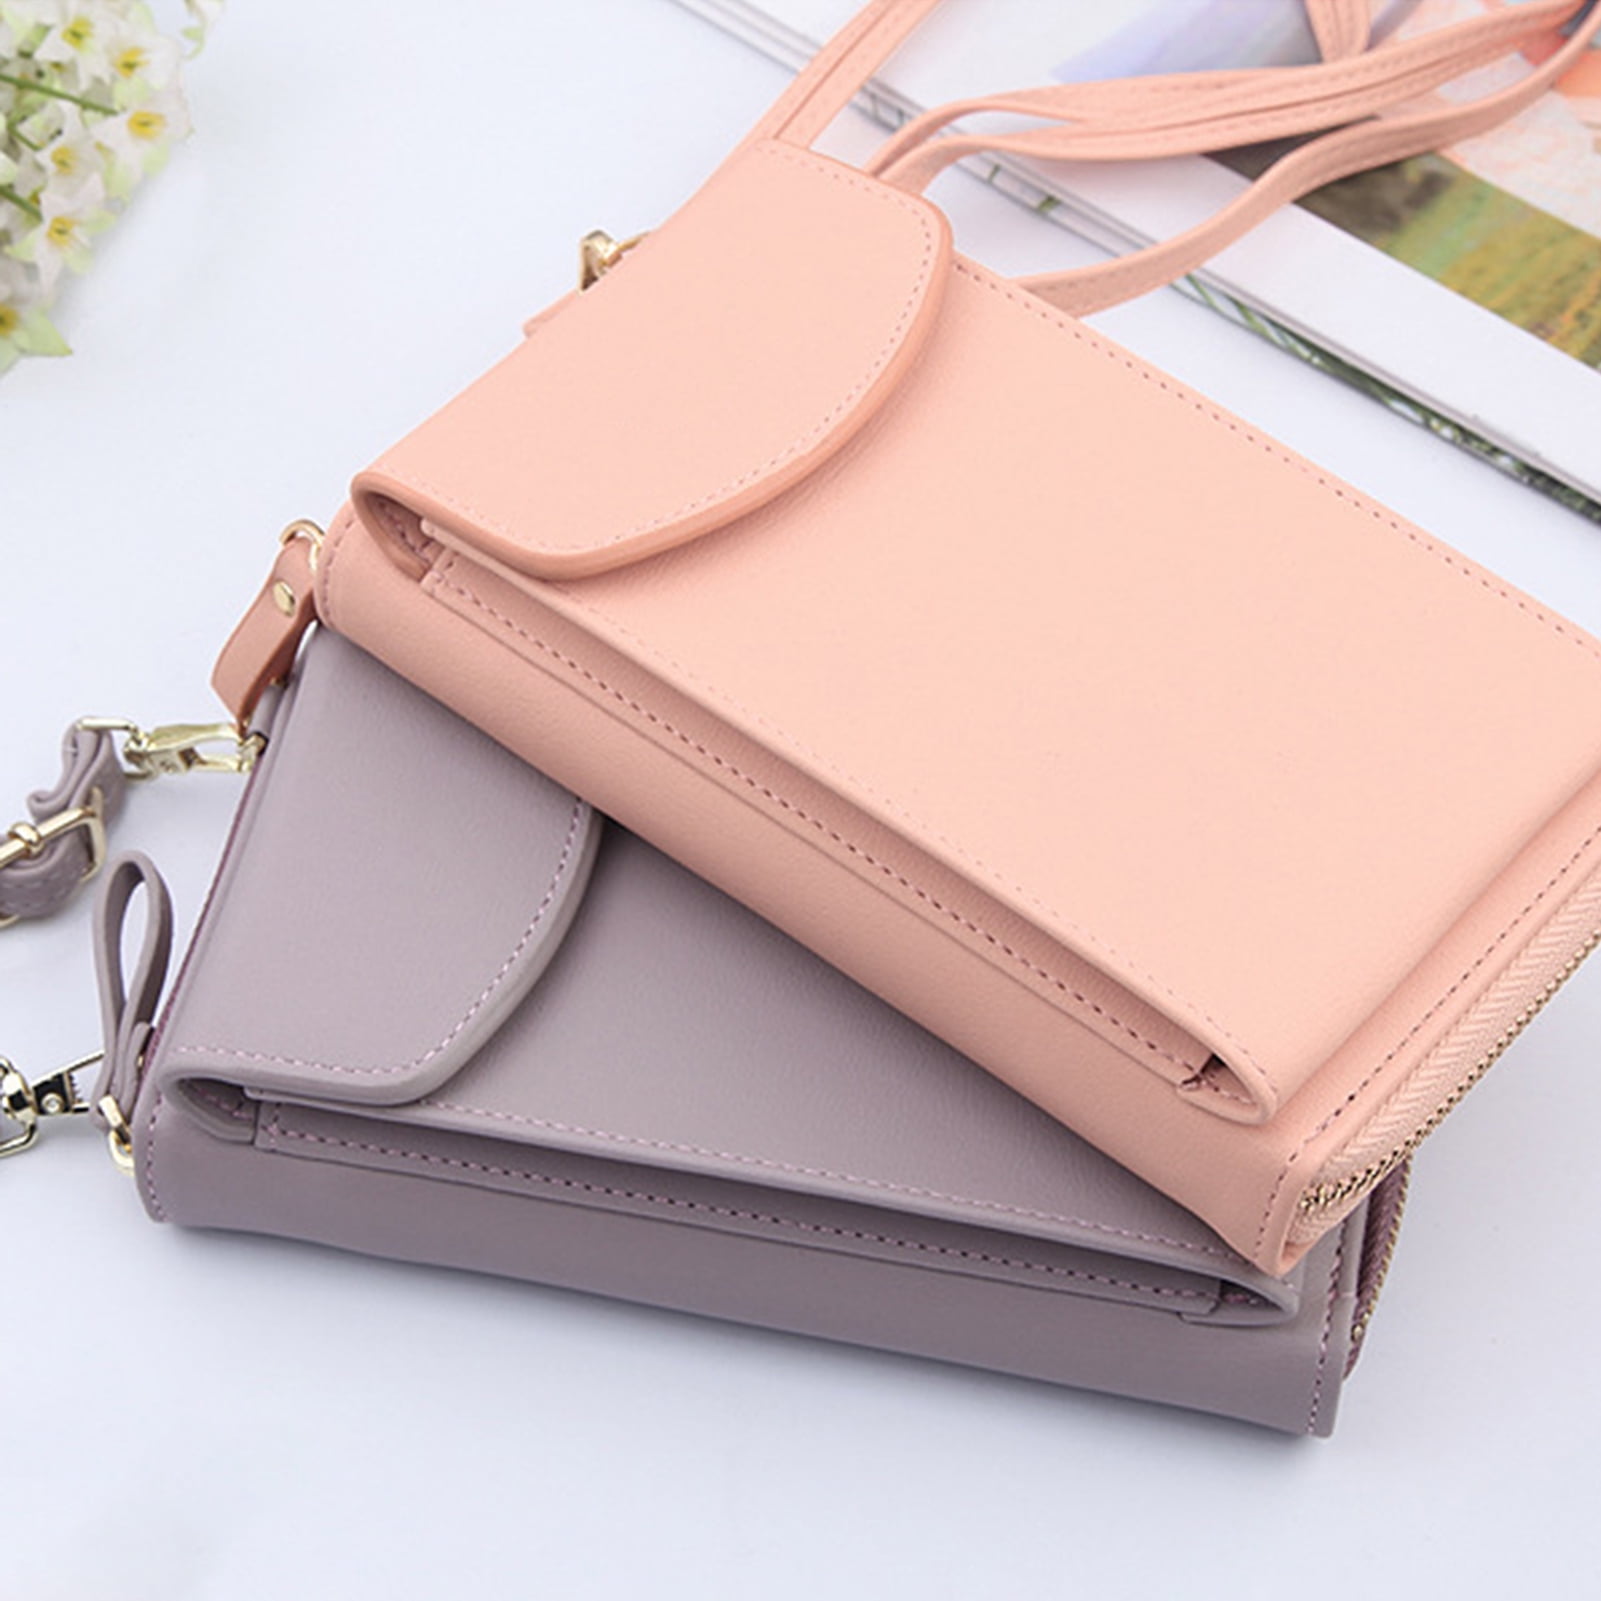 FOXLOVER Leather Crossbody Cell Phone Purse for Women RFID Blocking Small  Wal... | eBay